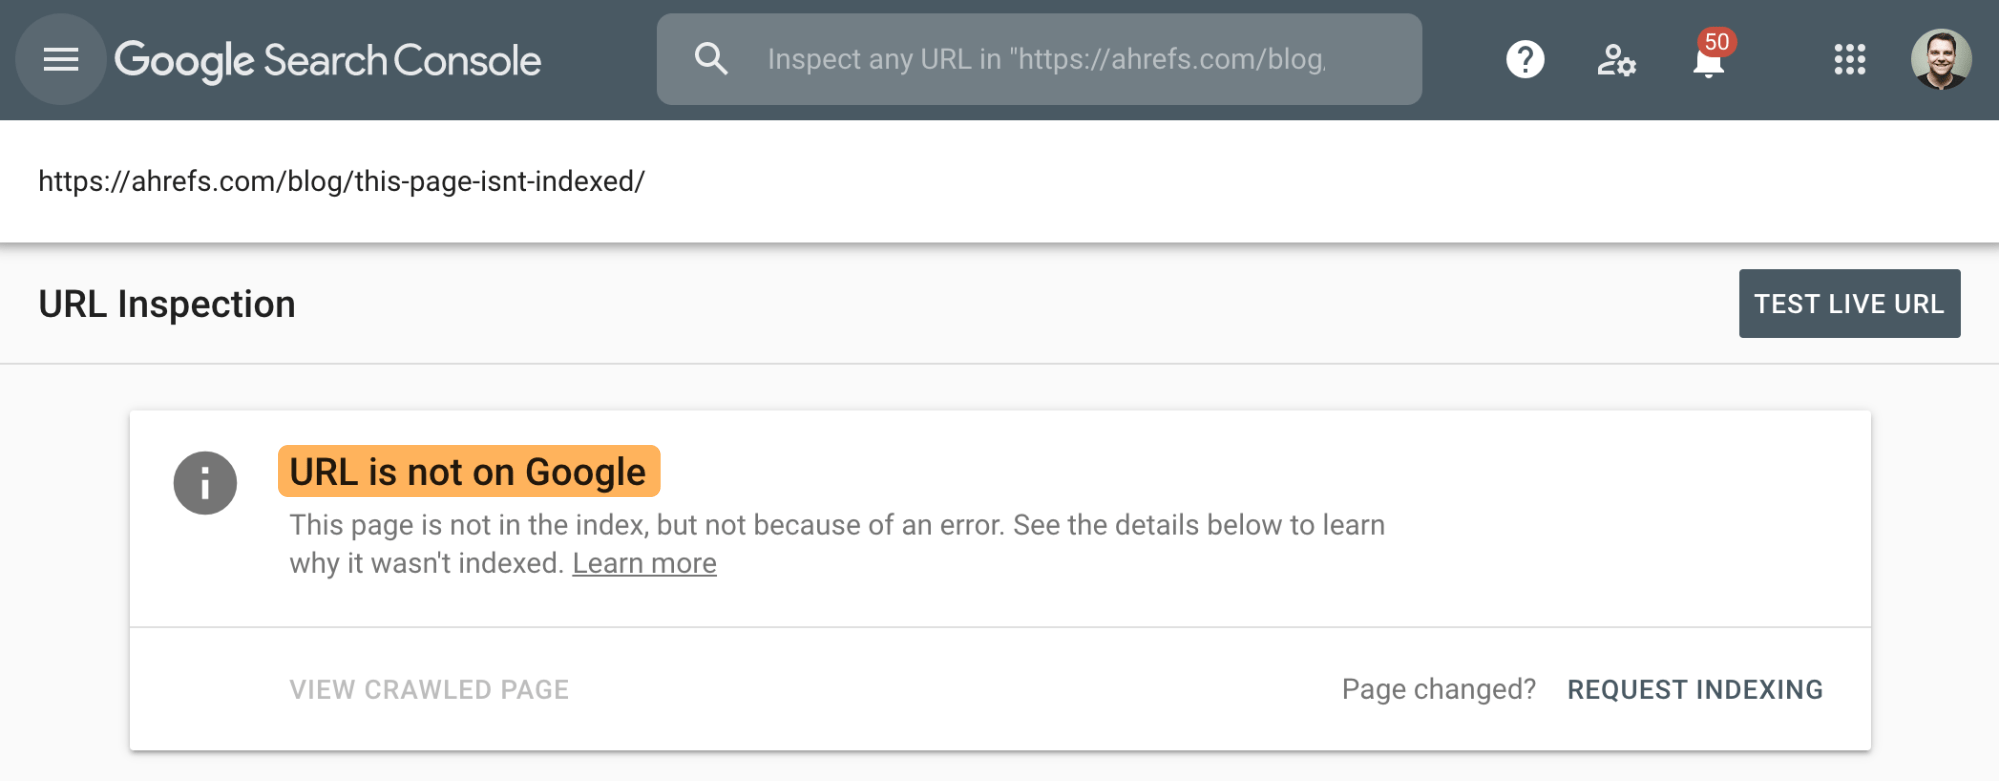 4-url-inspection-not-on-google.png